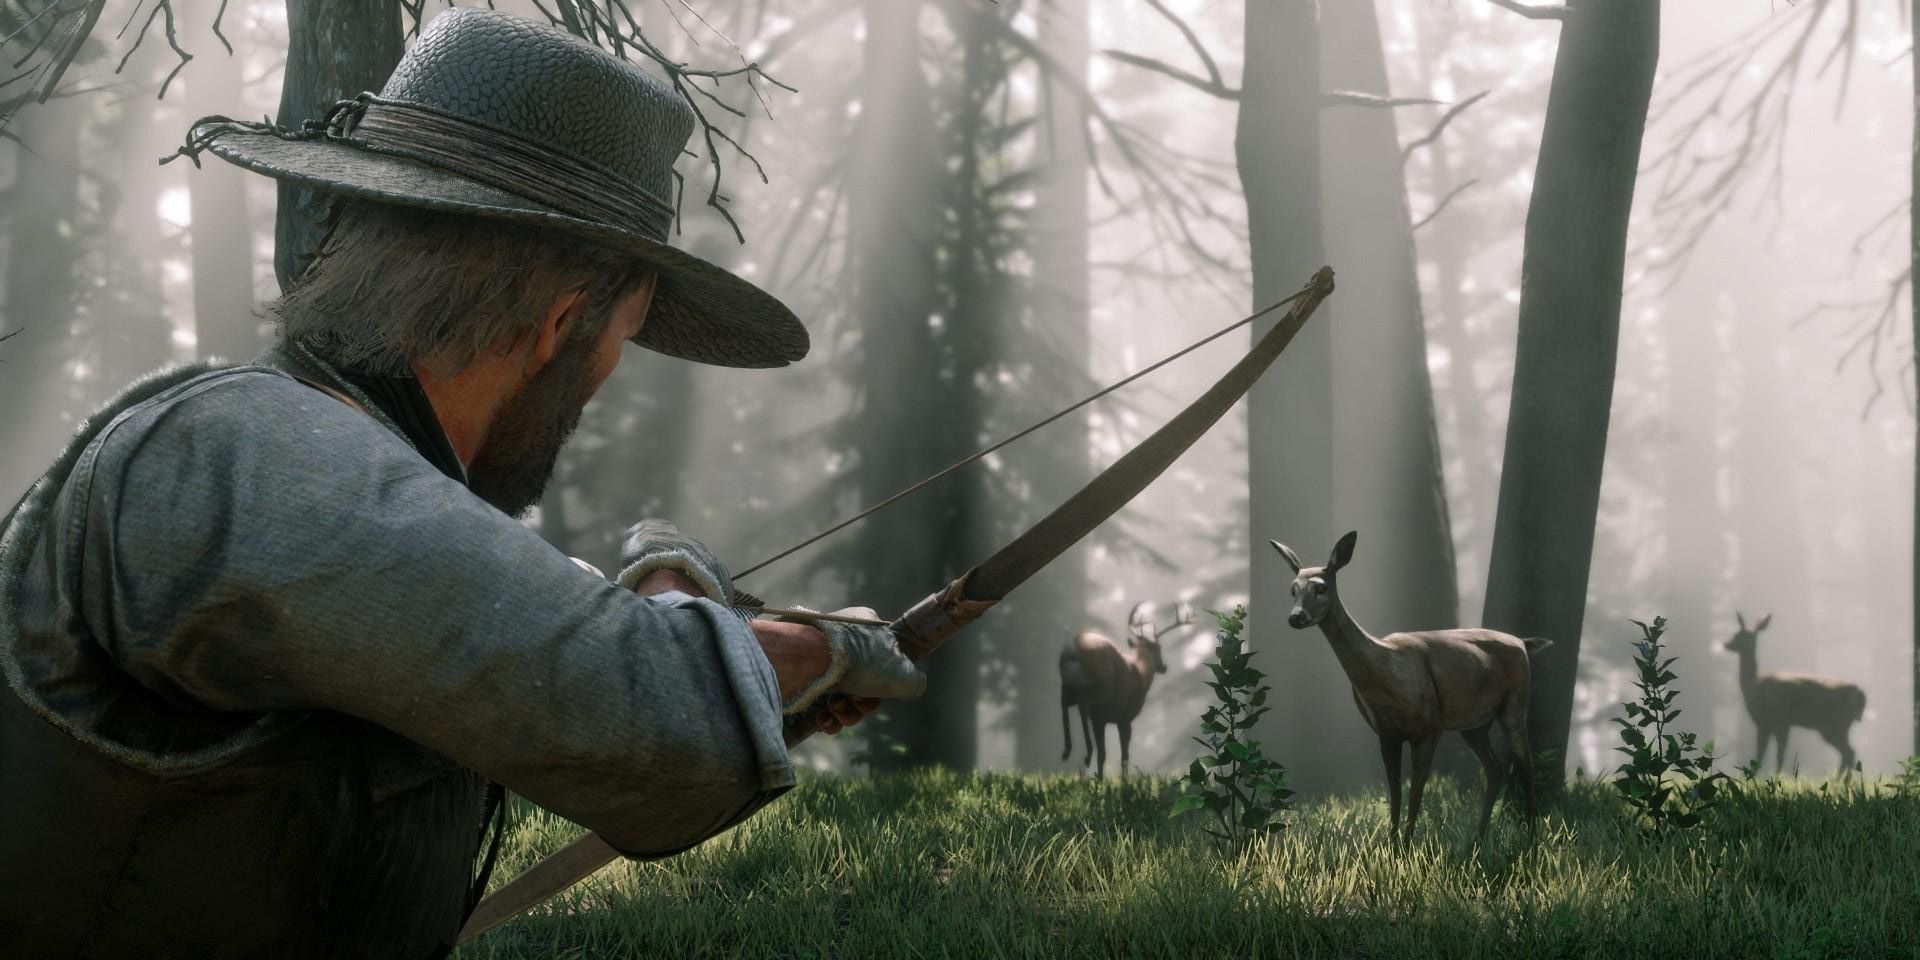 A whitetail deer in Read Dead Redemption 2